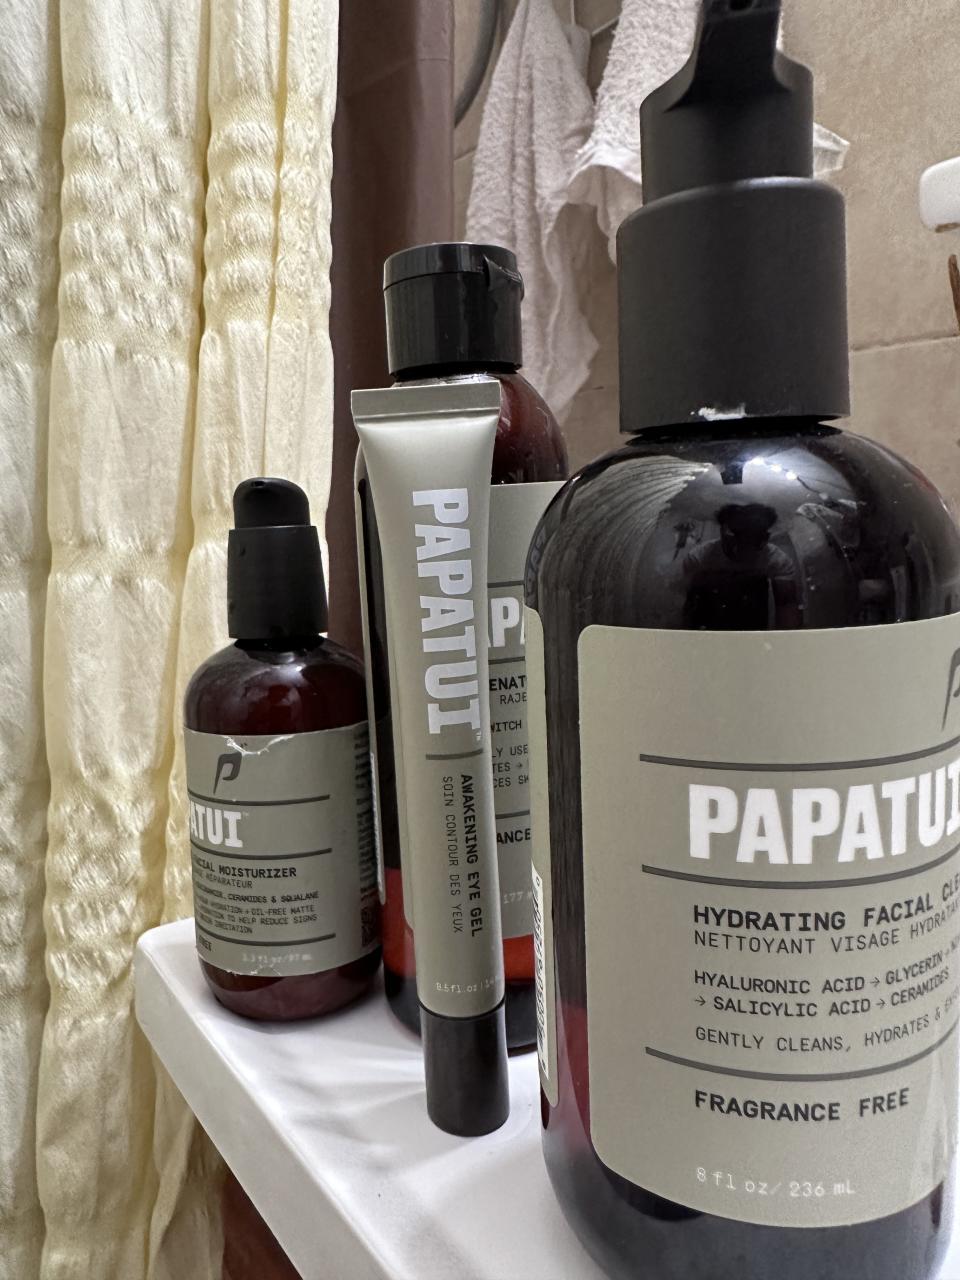 Picture of Papatui products used in this analysis.